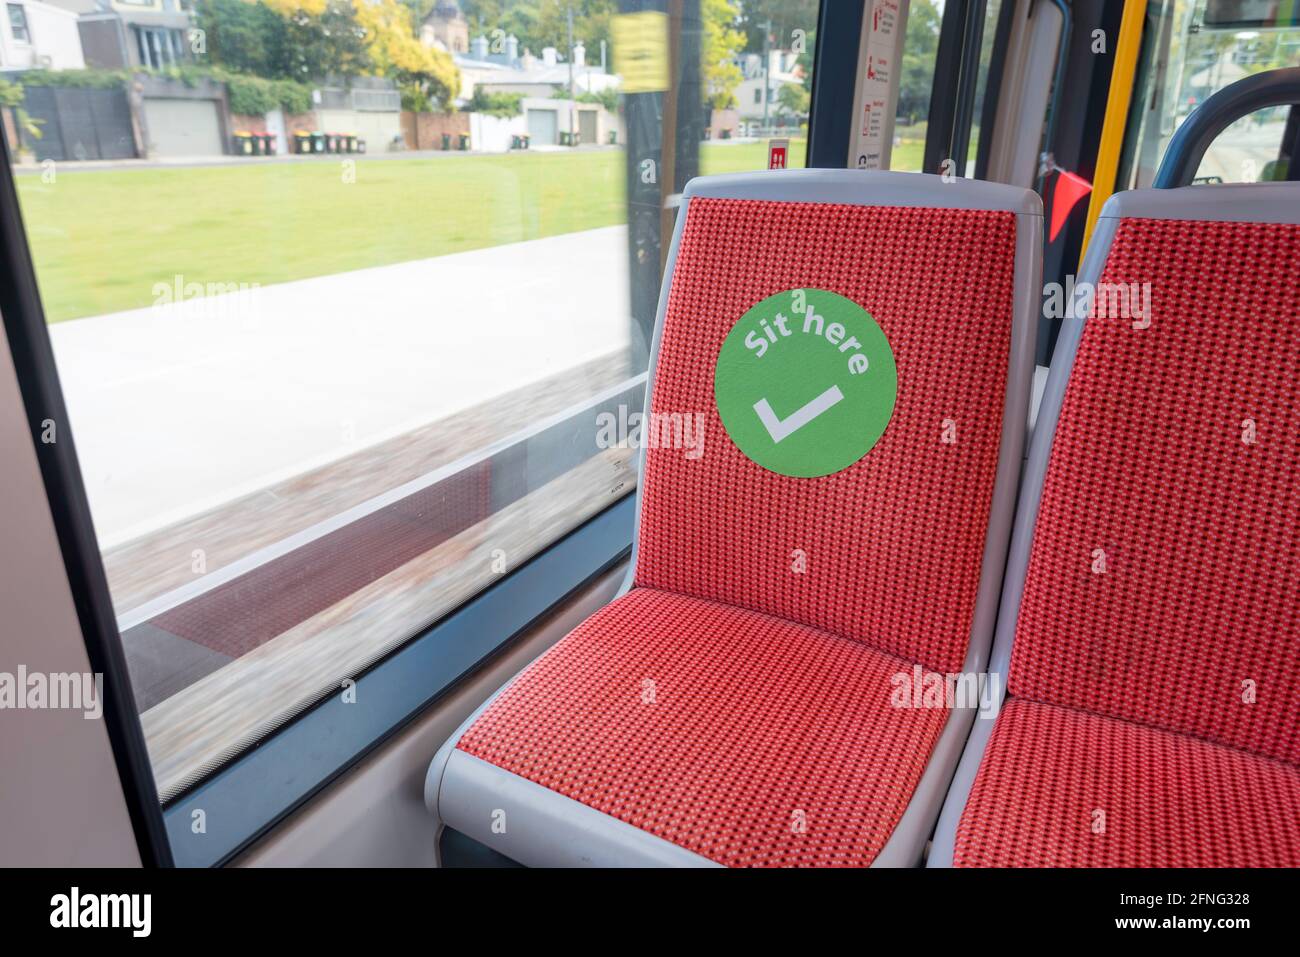 A big green tick sticker or decal on a seat in a Sydney Light Rail Tram indicates a safe place to sit during the Covid-19 pandemic in Australia Stock Photo